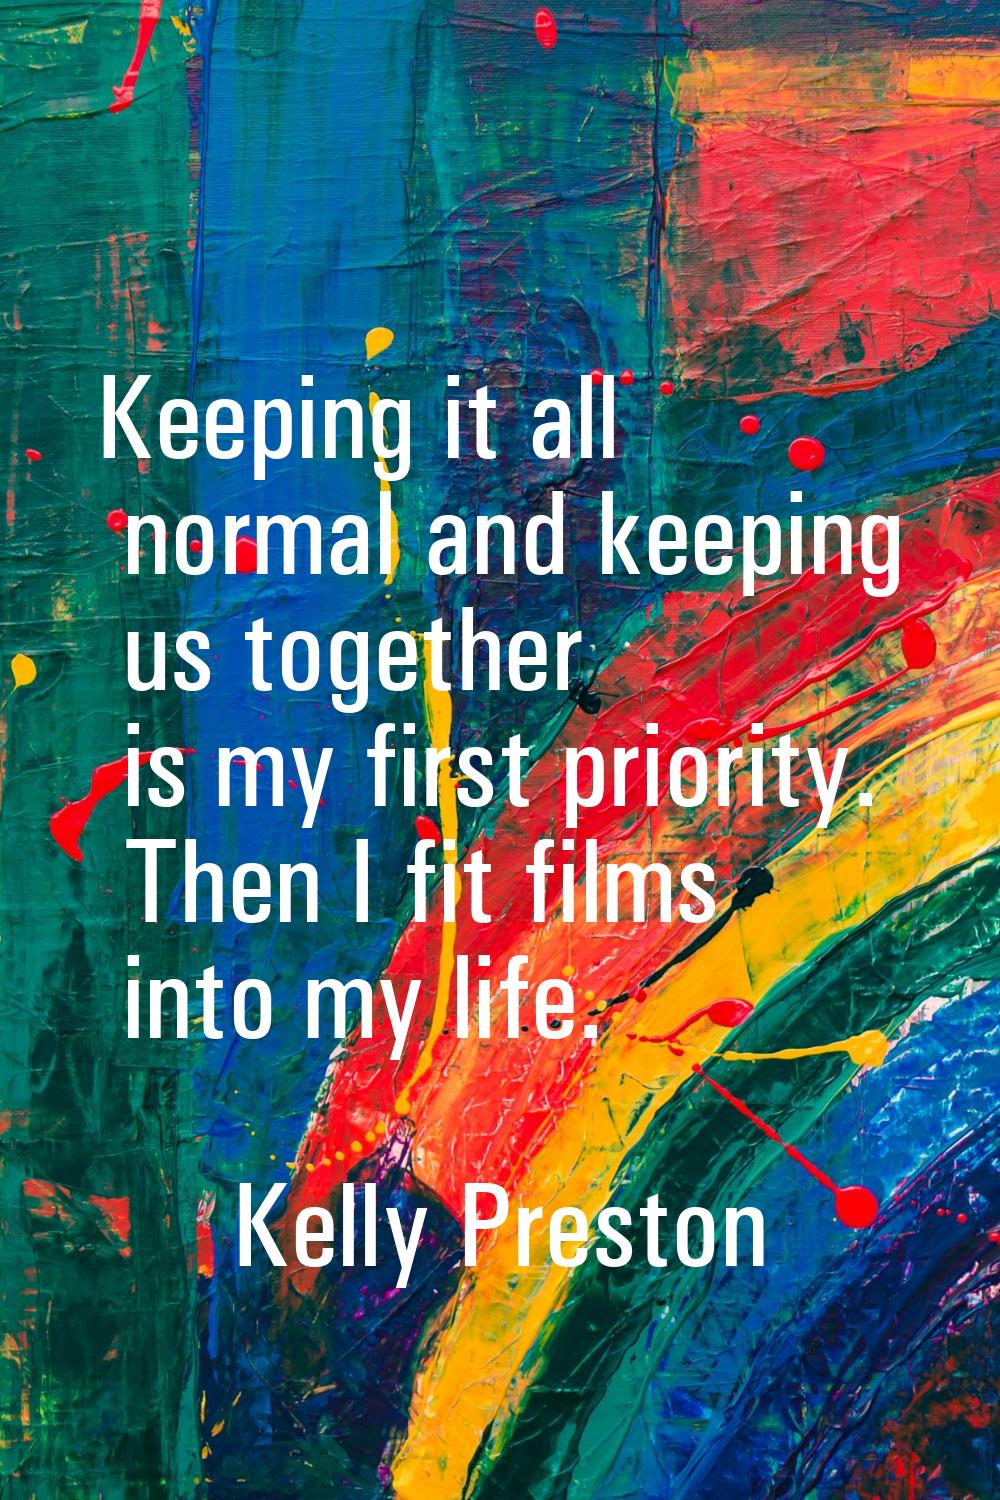 Keeping it all normal and keeping us together is my first priority. Then I fit films into my life.